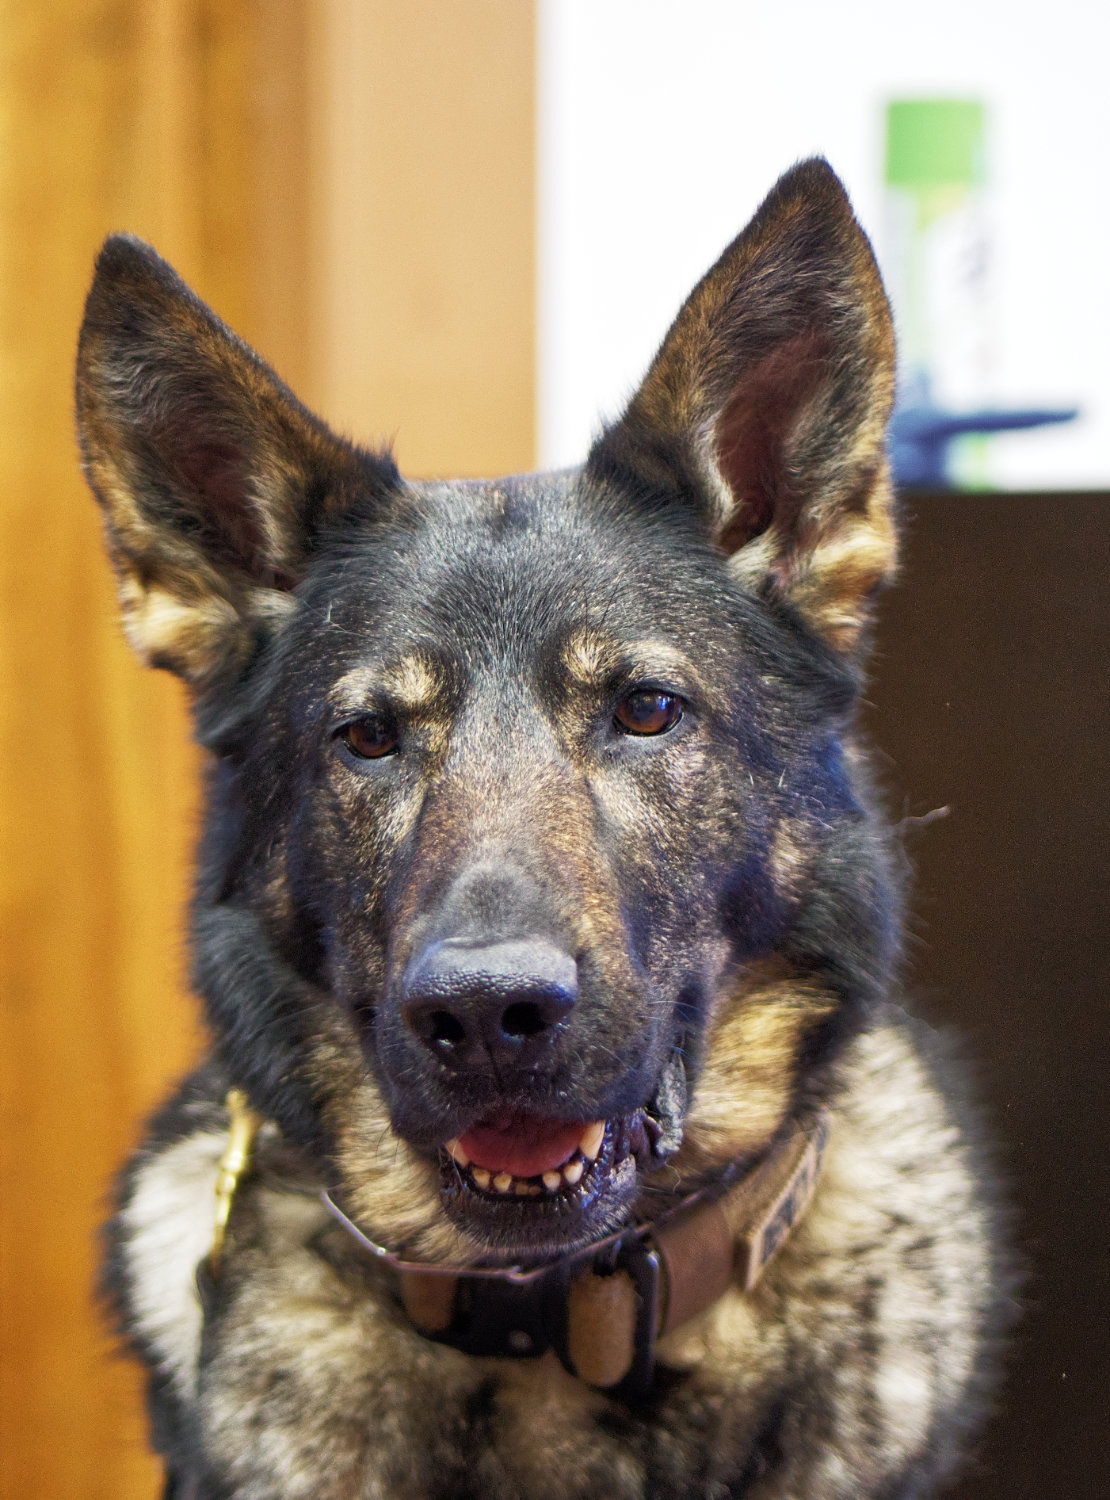 Juma, the law enforcement canine who captured the hearts of Wood County, had to be put down last week after suffering from Addison’s disease.